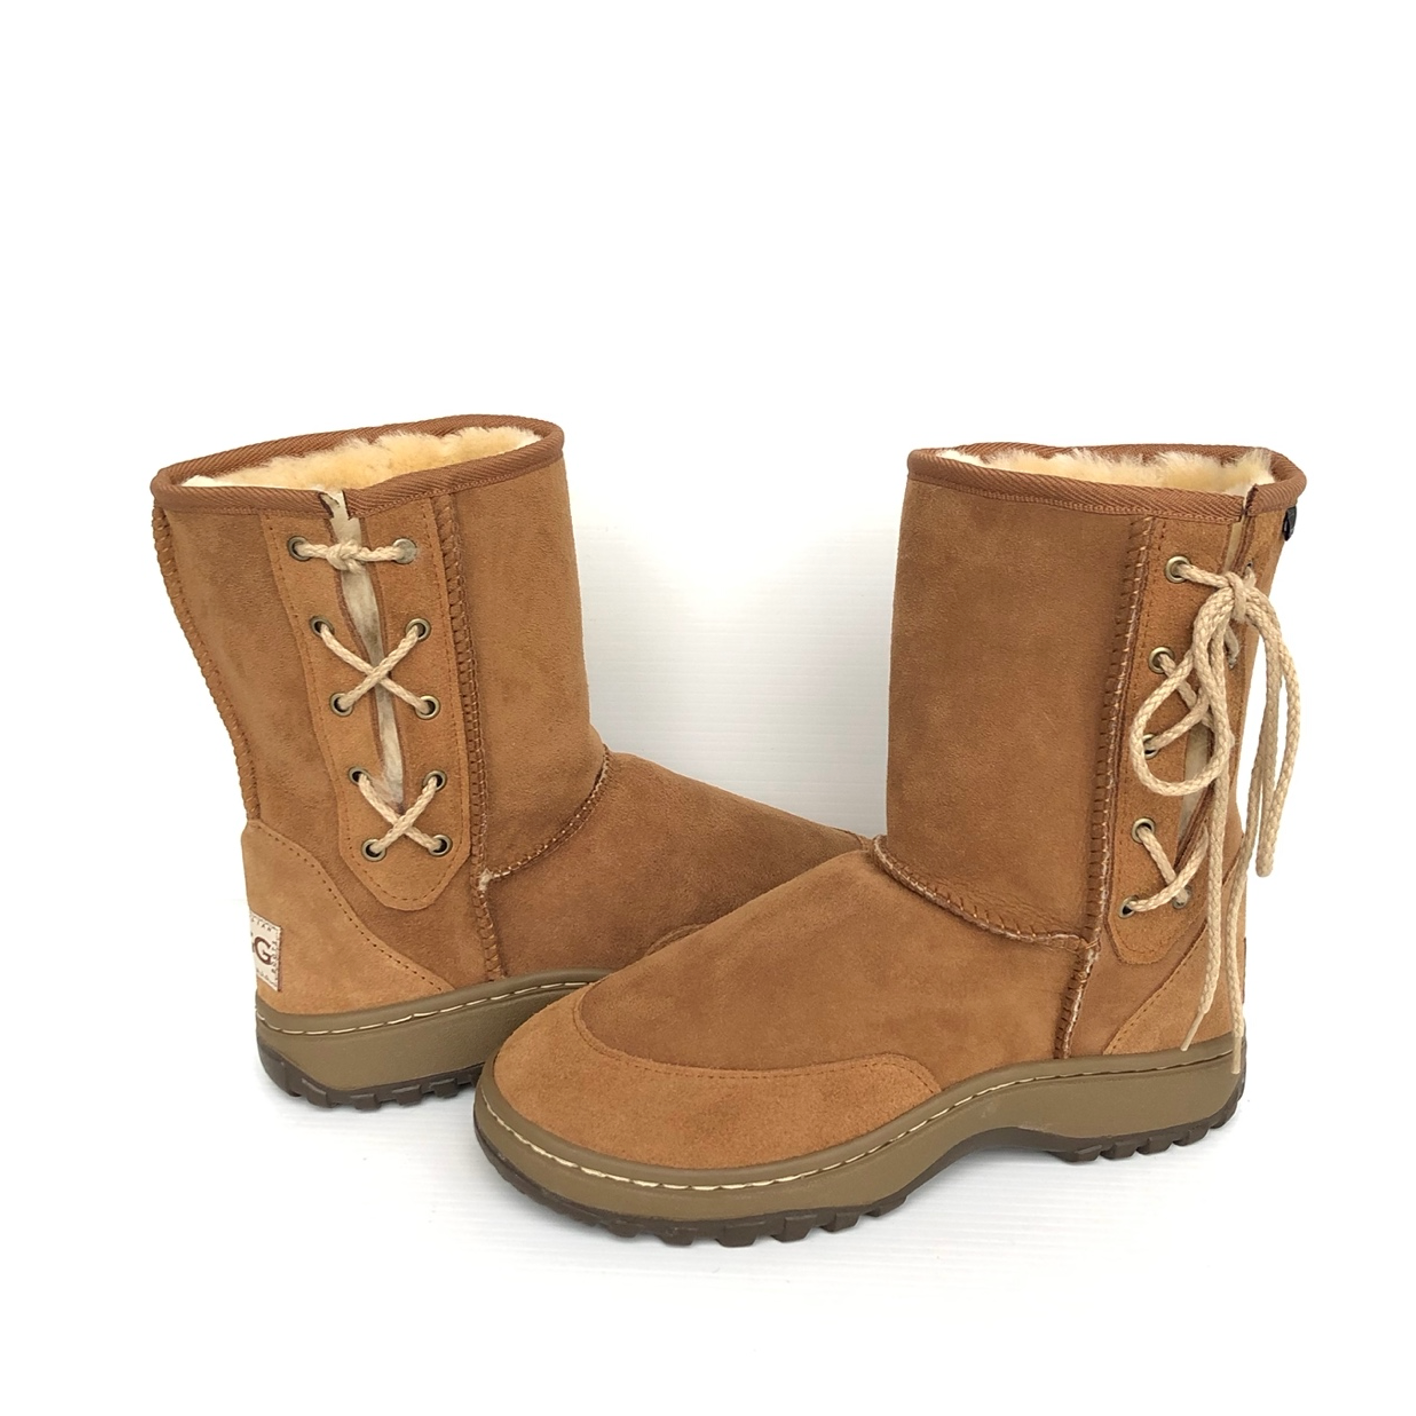 Chestnut colour outdoor ugg boots with side laces